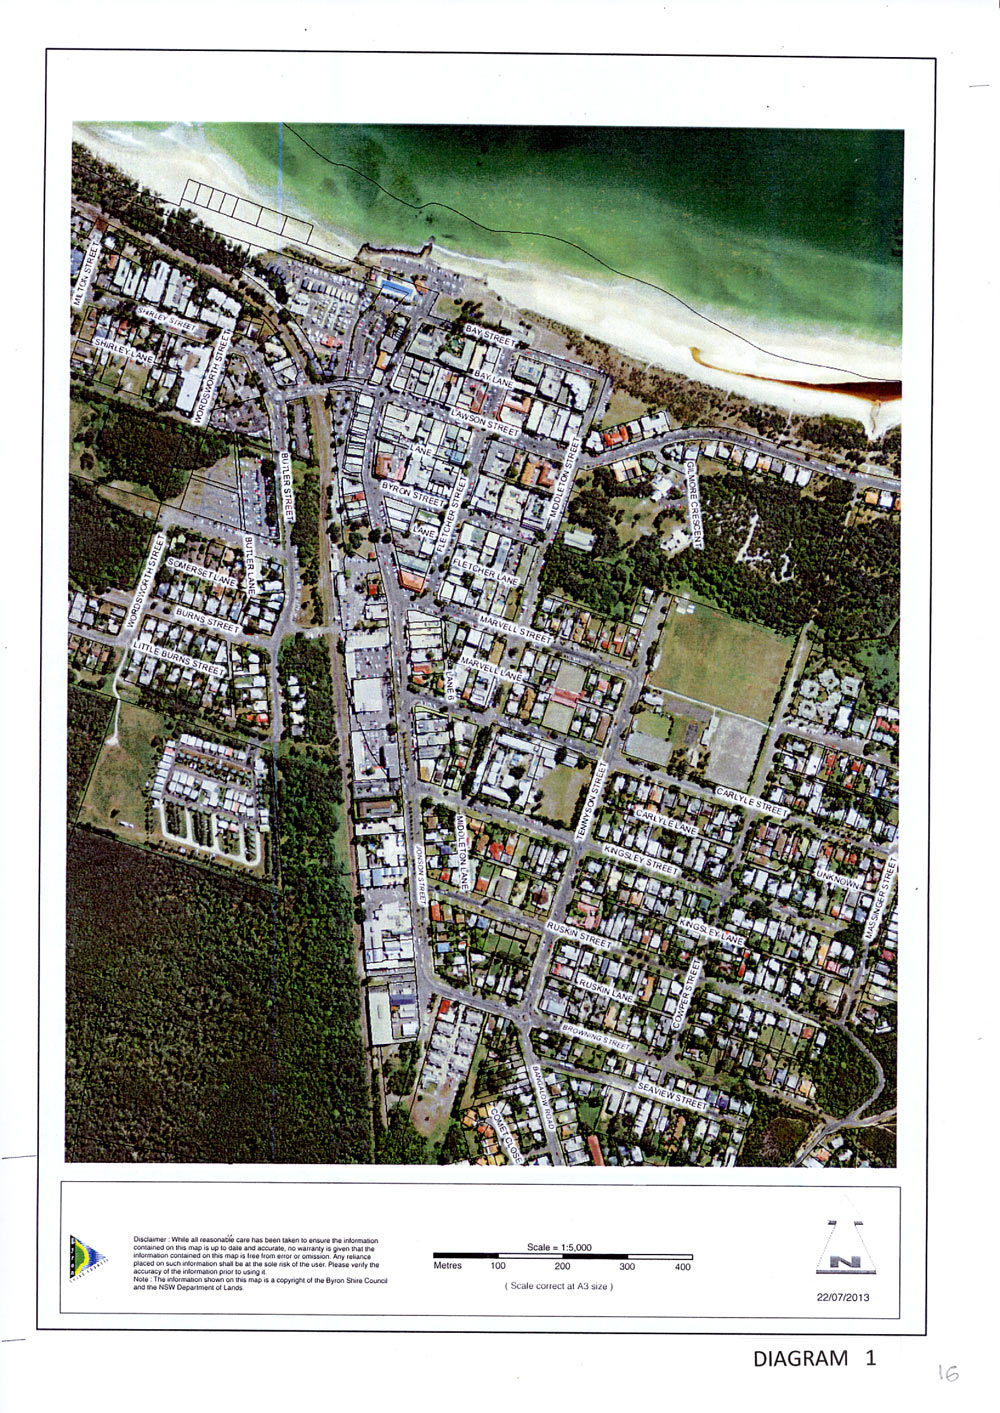 BYRON BAY TOWN CENTRE MASTER PLAN aerial view